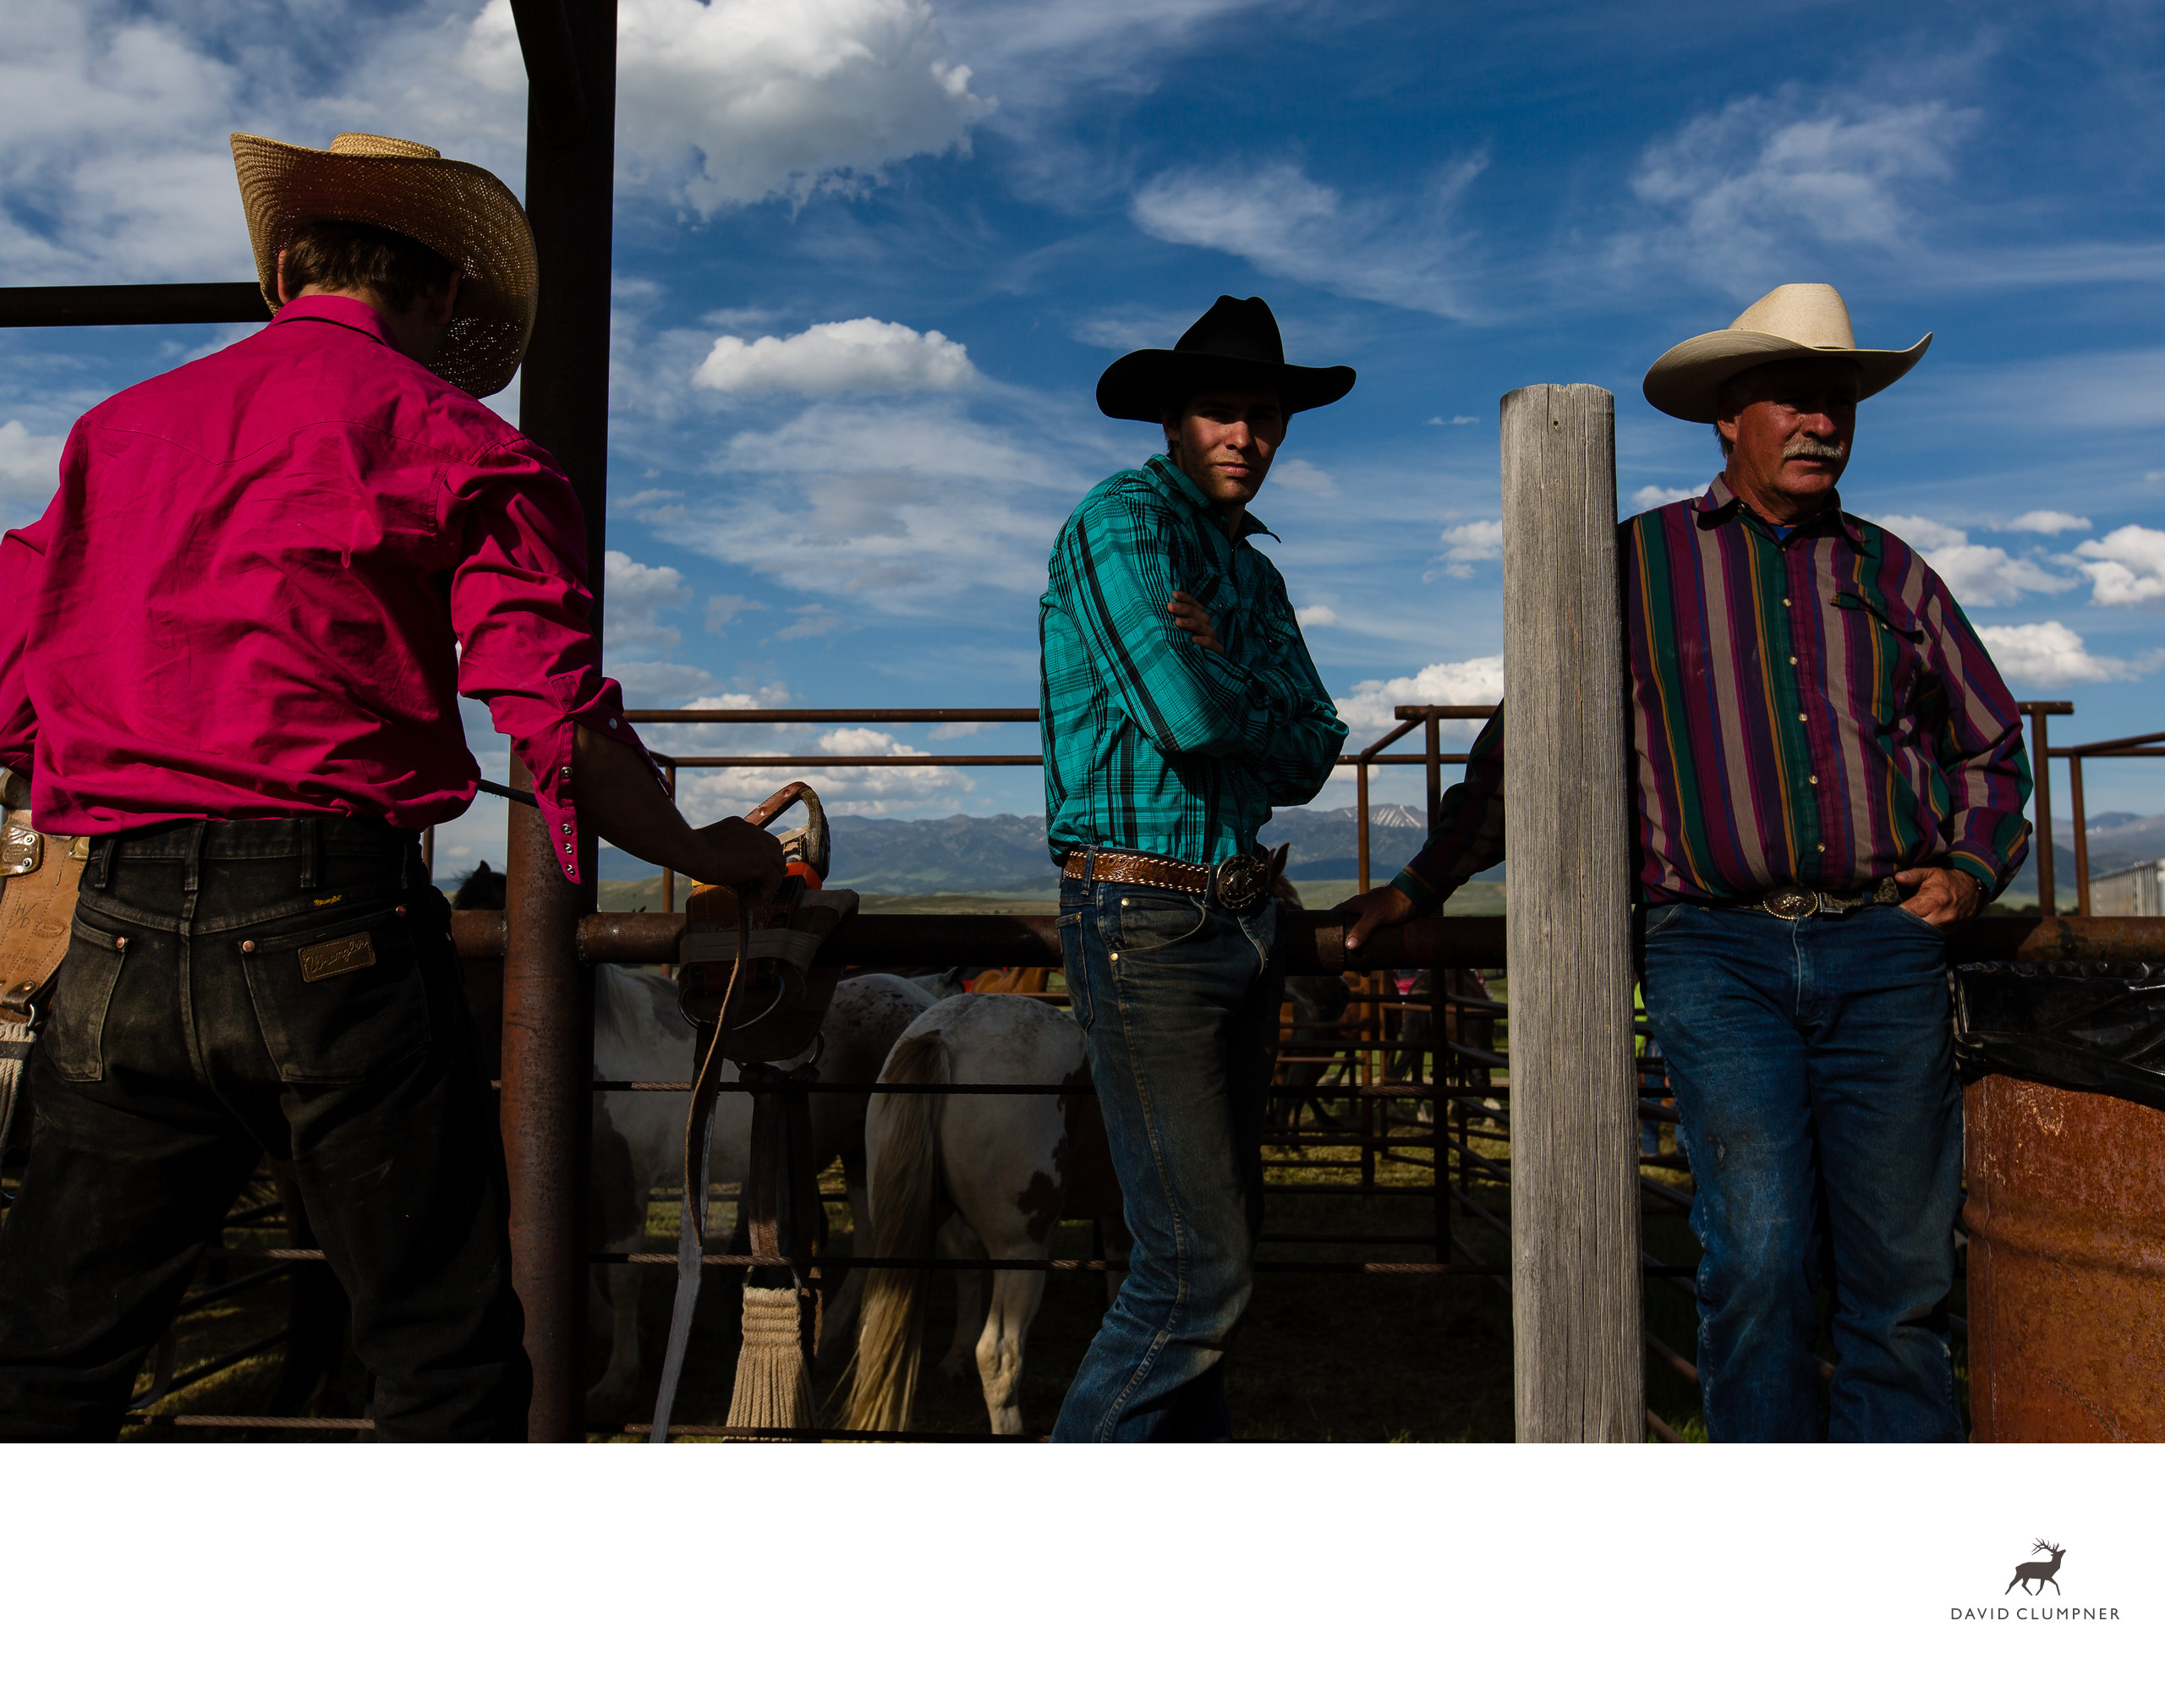 Cowboys at the Wilsall Rodeo in Montana David Clumpner Photography